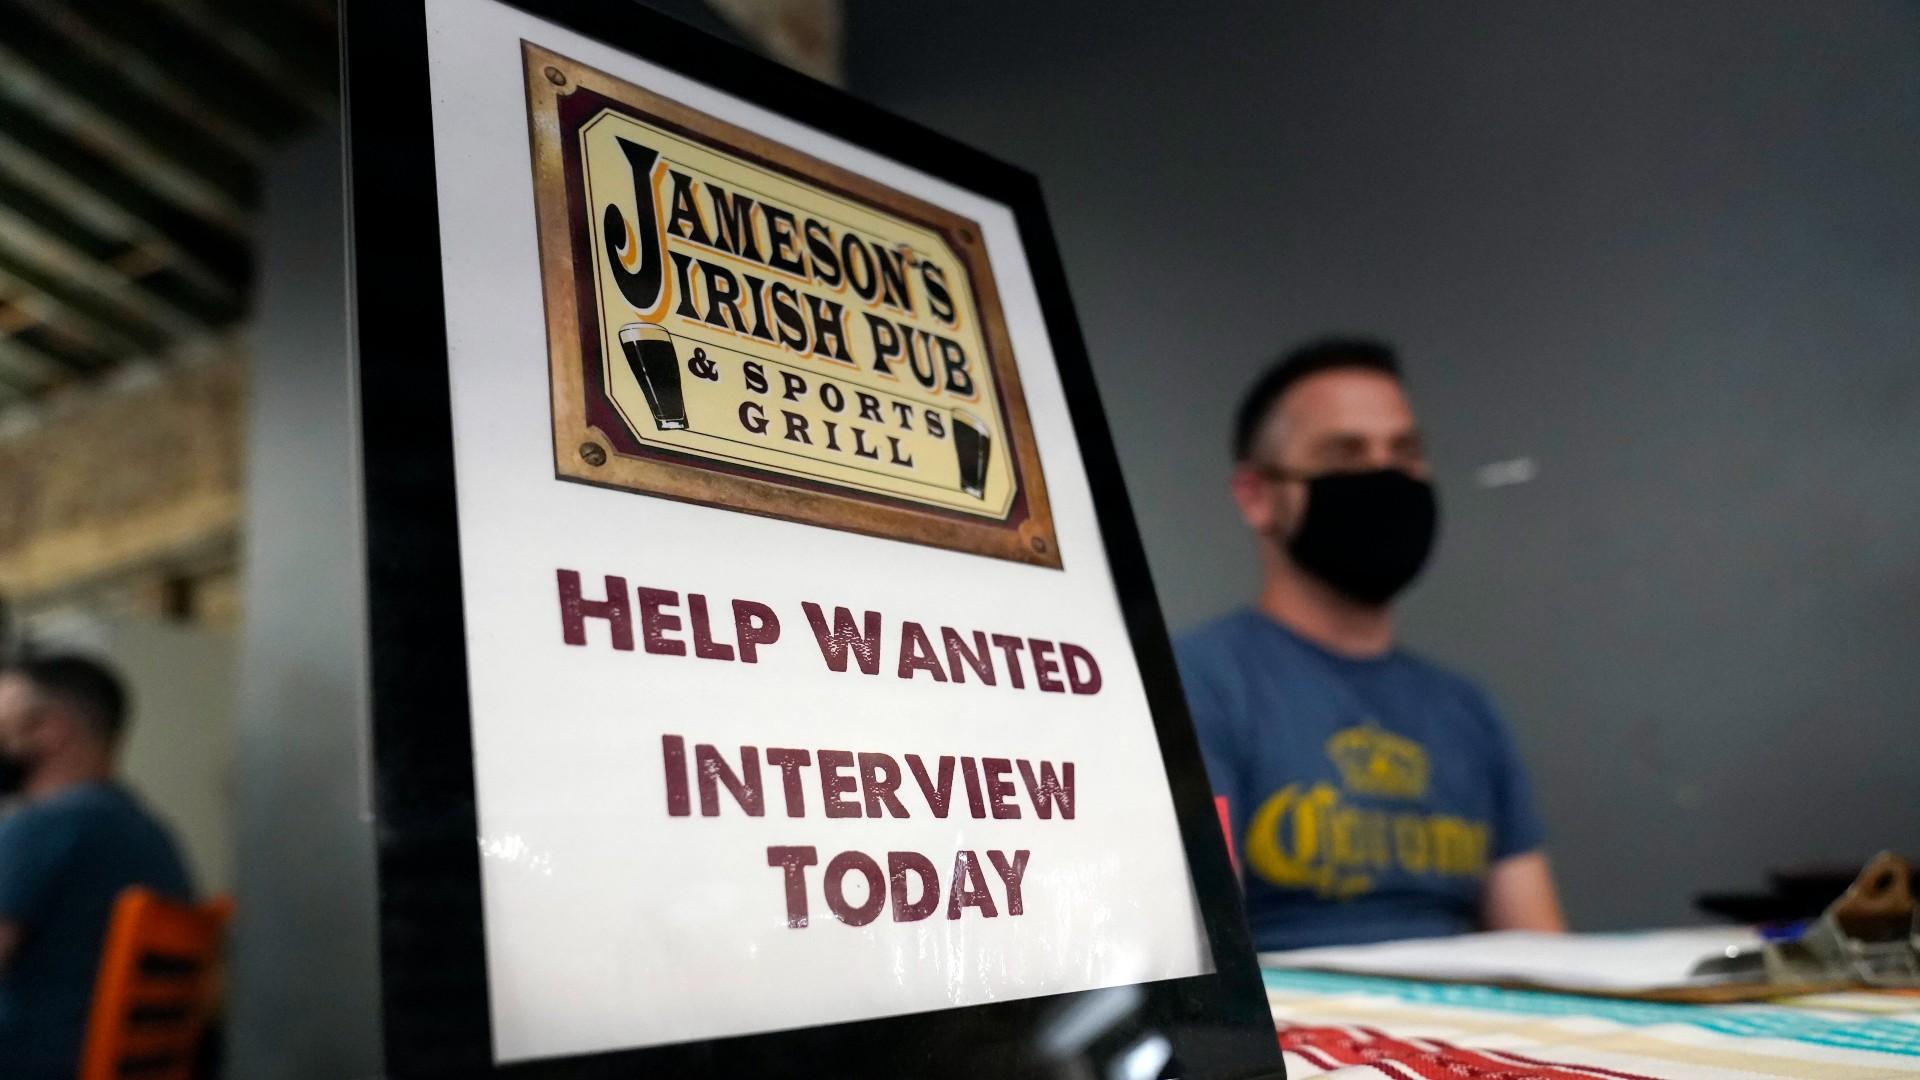 A hiring sign is placed at a booth for Jameson's Irish Pub during a job fair Wednesday, Sept. 22, 2021, in the West Hollywood section of Los Angeles. (AP Photo / Marcio Jose Sanchez, File)